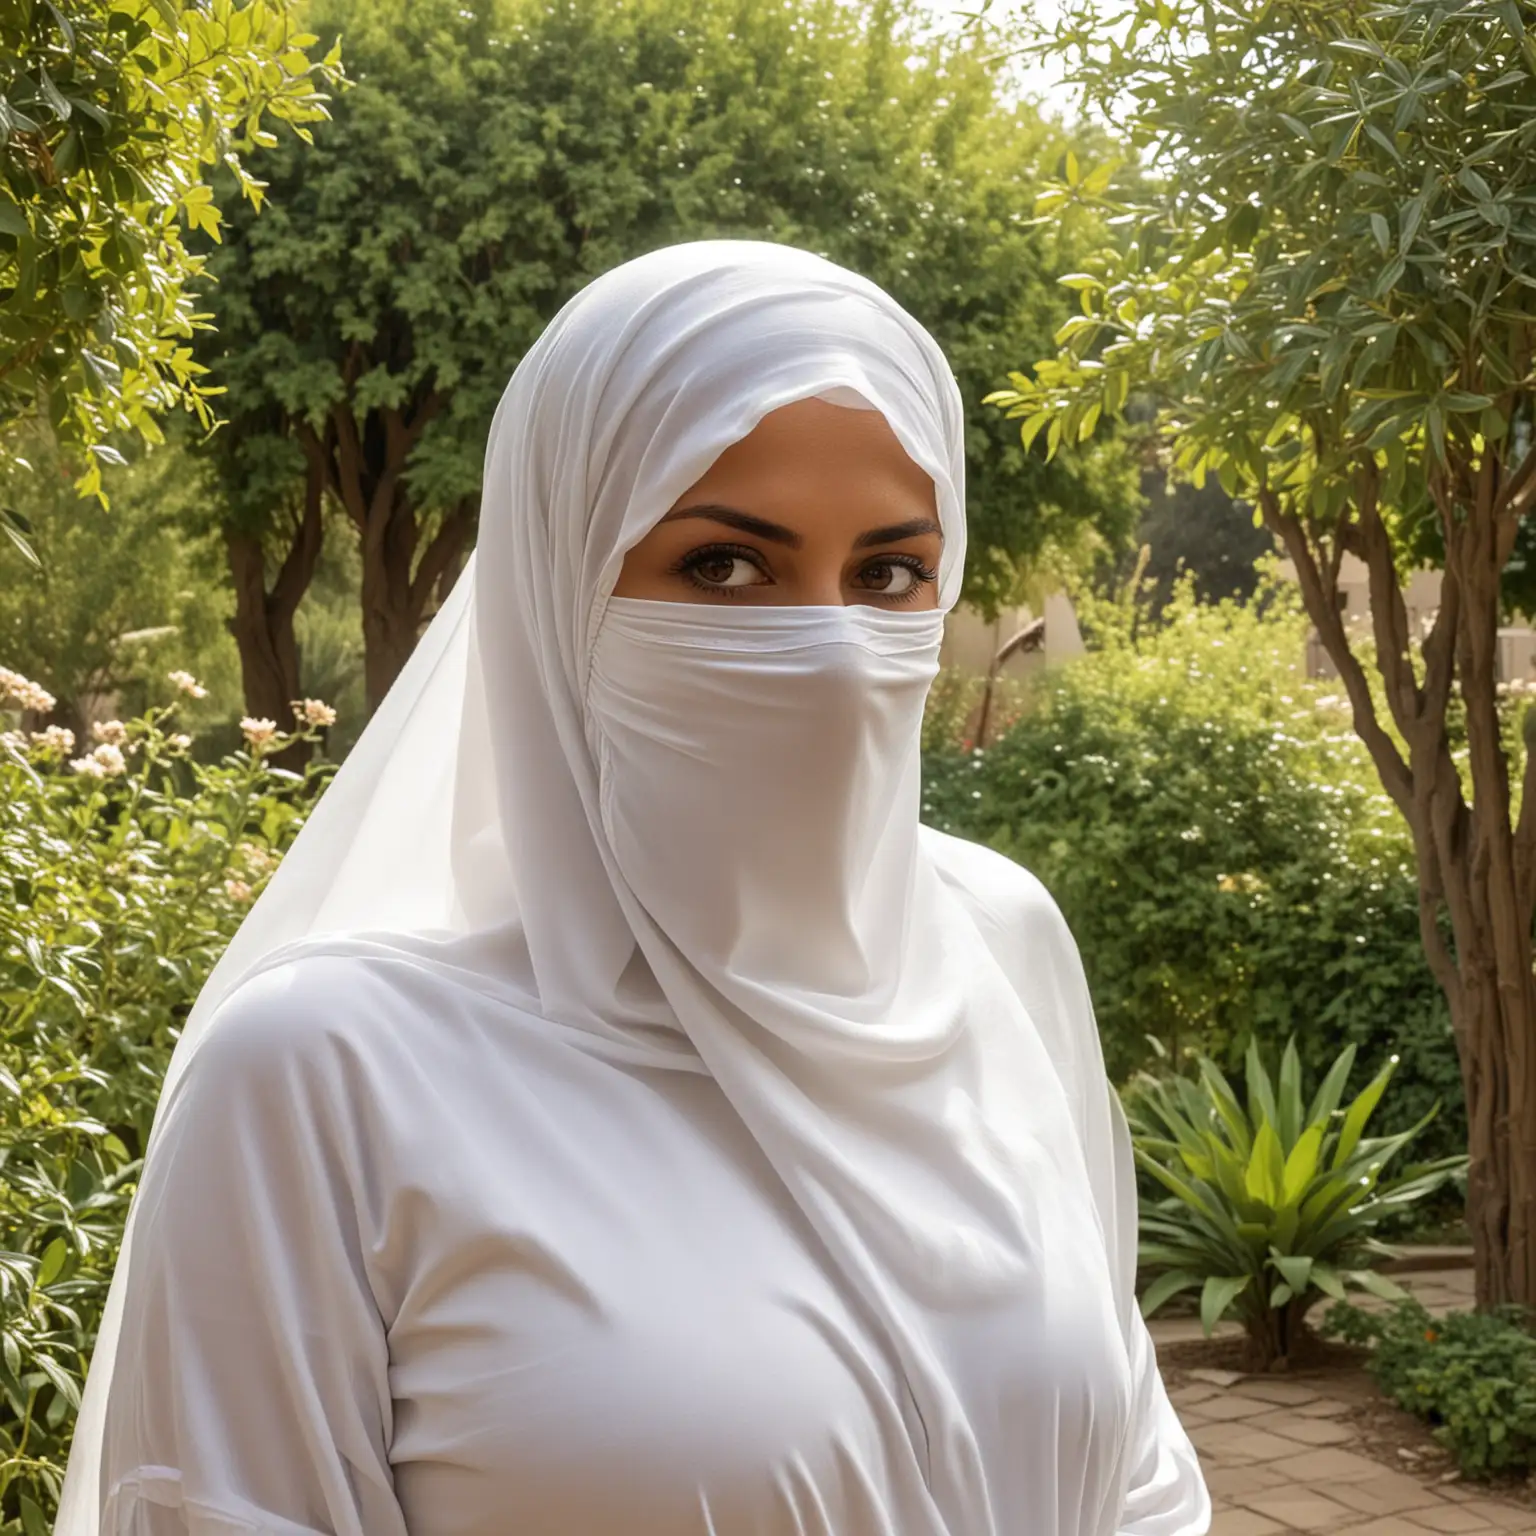 sexy 40 year old iranian woman with huge 40F breasts, in a very tight white burqa with face hidden by a niqab, with beautiful free flowing brown hair, in a garden. 